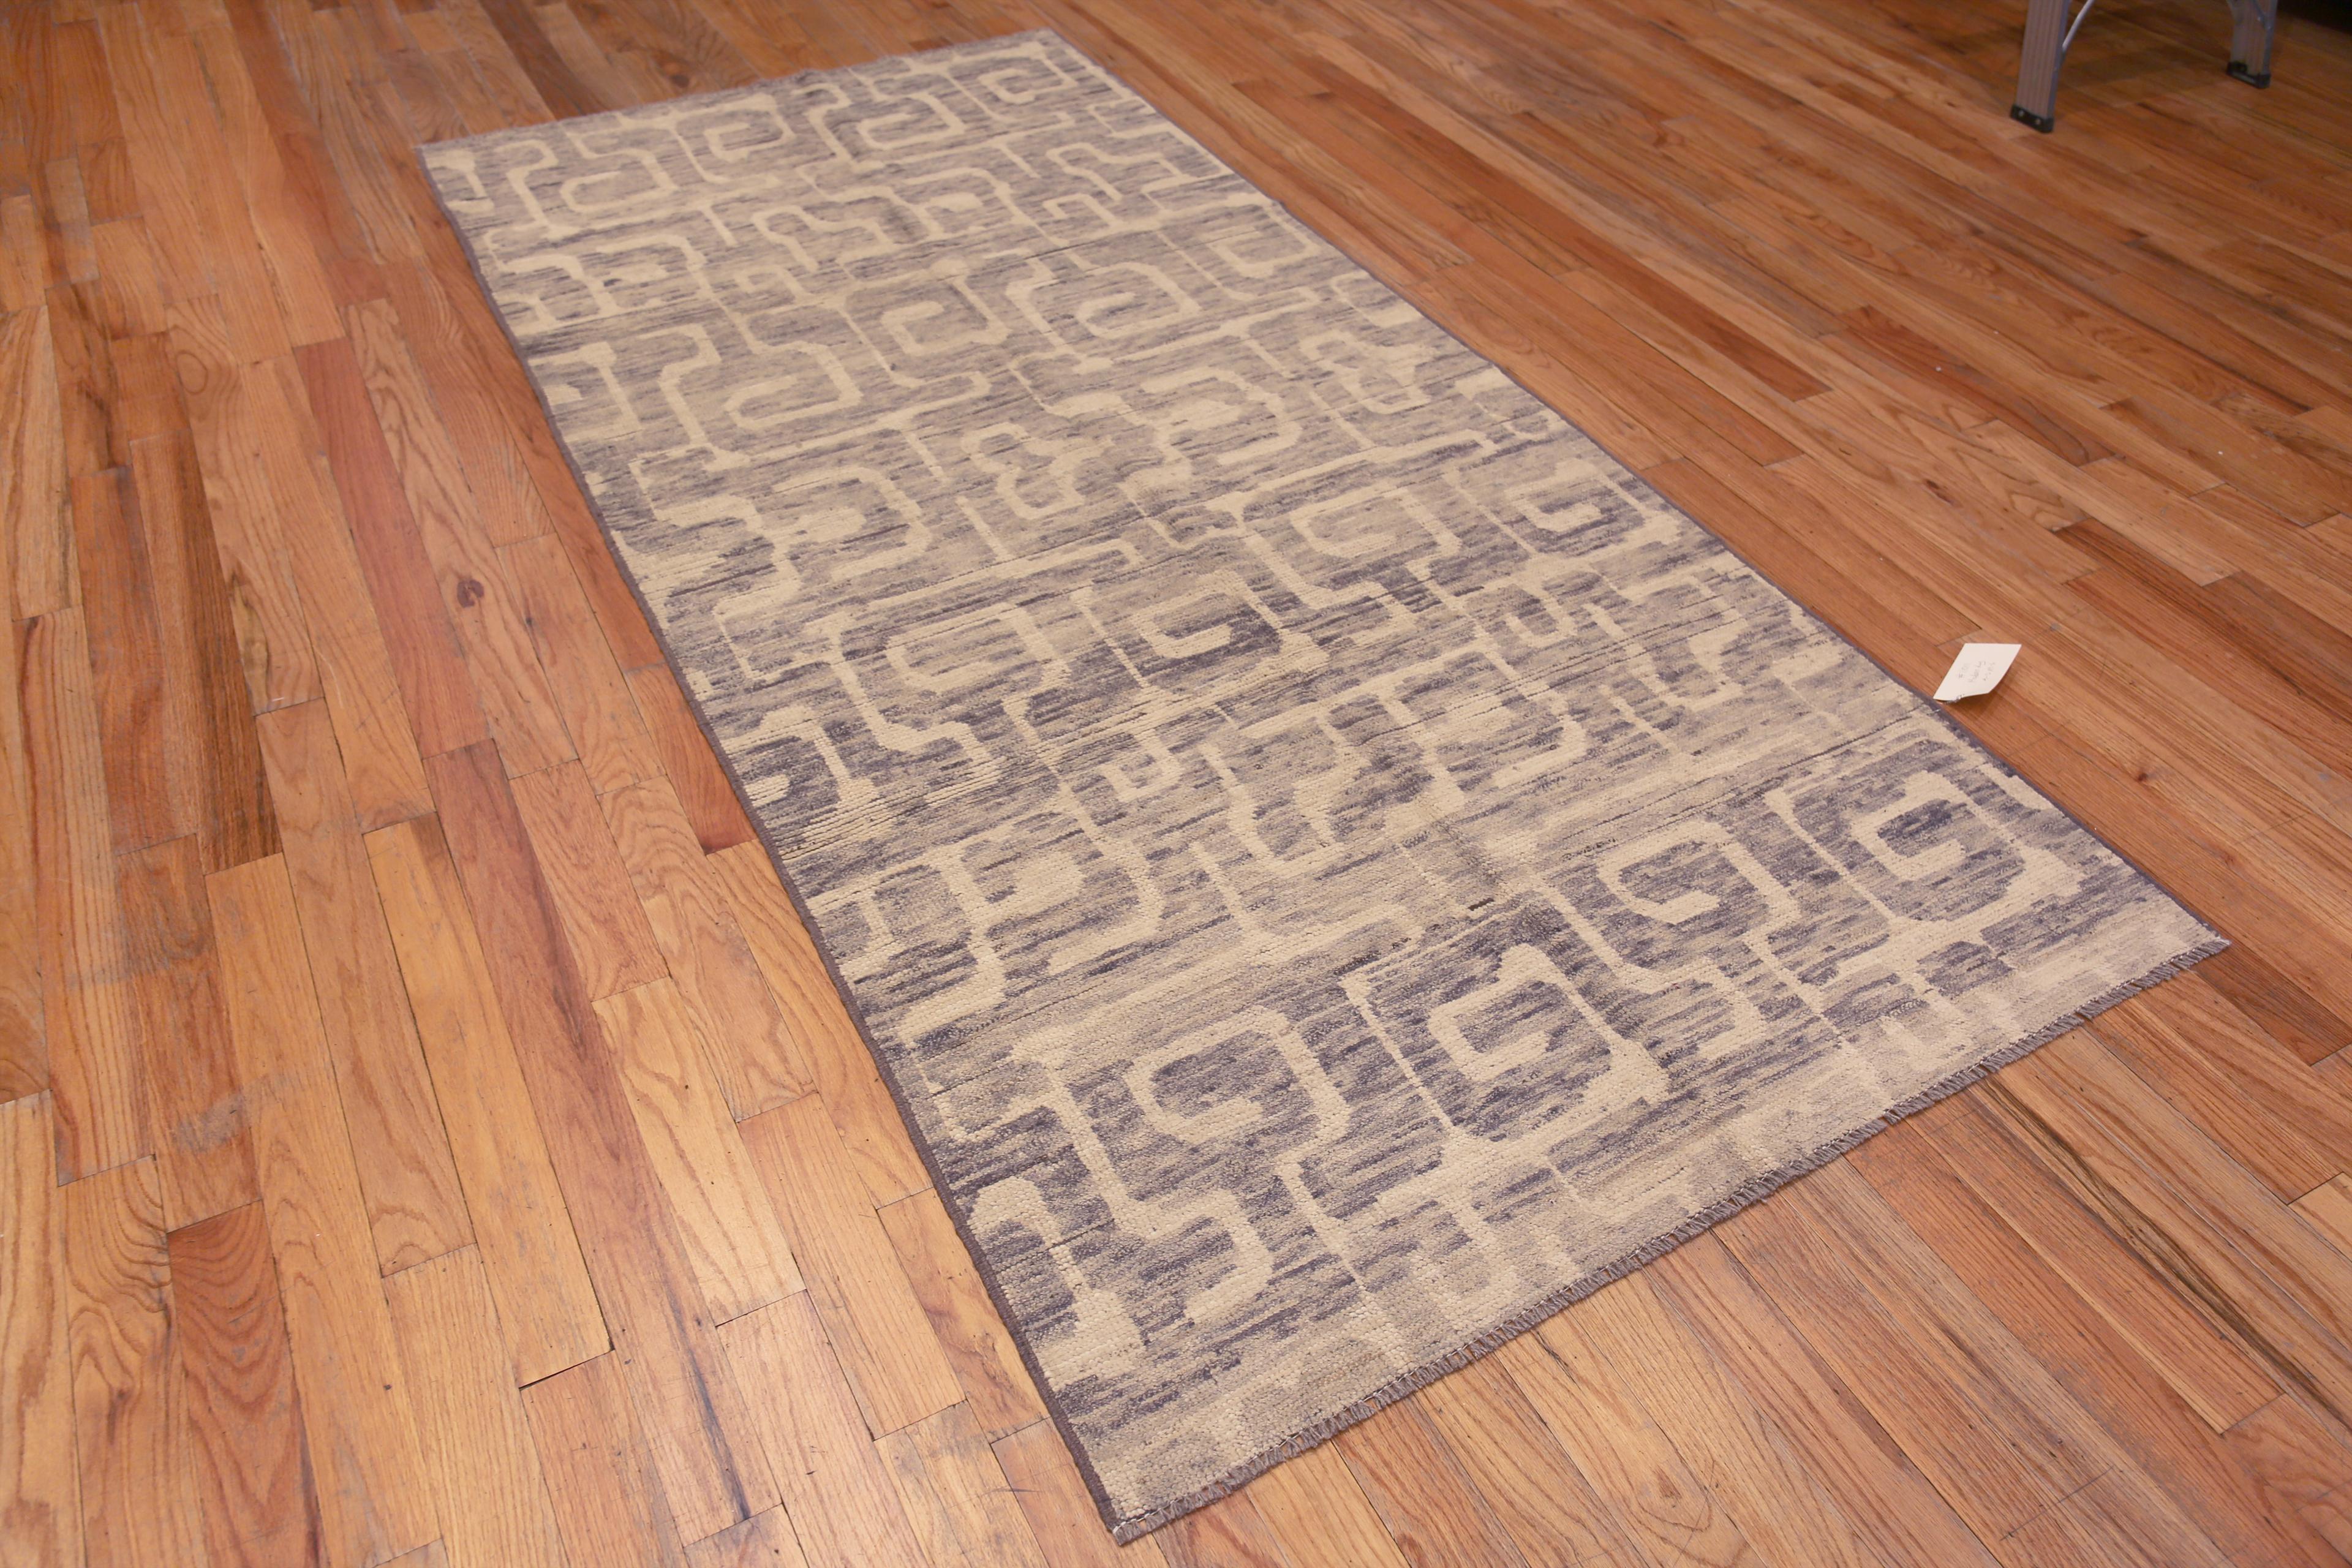 A Beautiful Neutral Color Tribal Geometric Design Long and Narrow Gallery Size Modern Area Rug, Country Of Origin: Central Asia, Circa Date: Modern Rug 